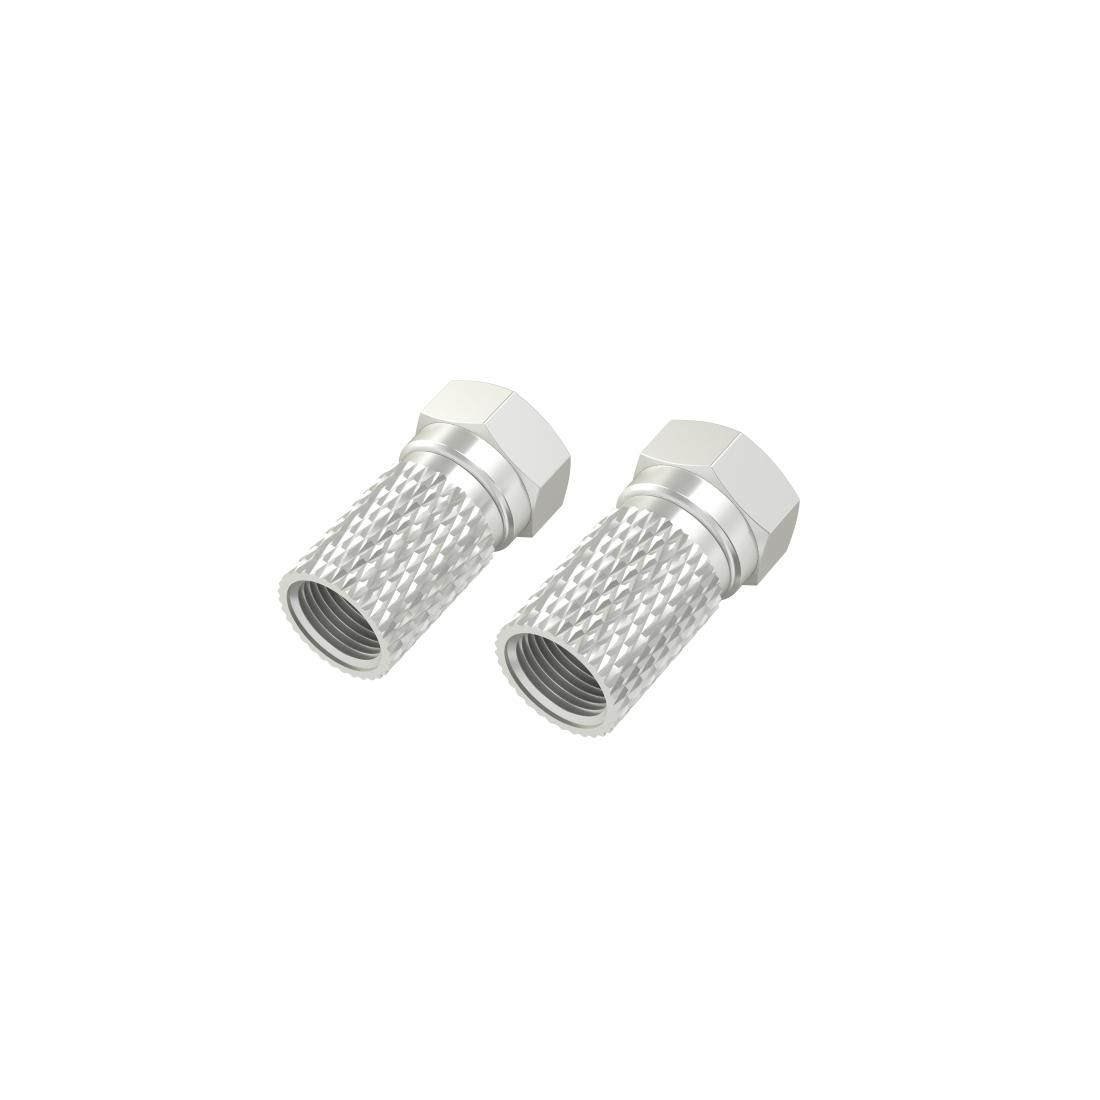 Hama 205204 W128824564 4 Coaxial Connector F-Type 2 